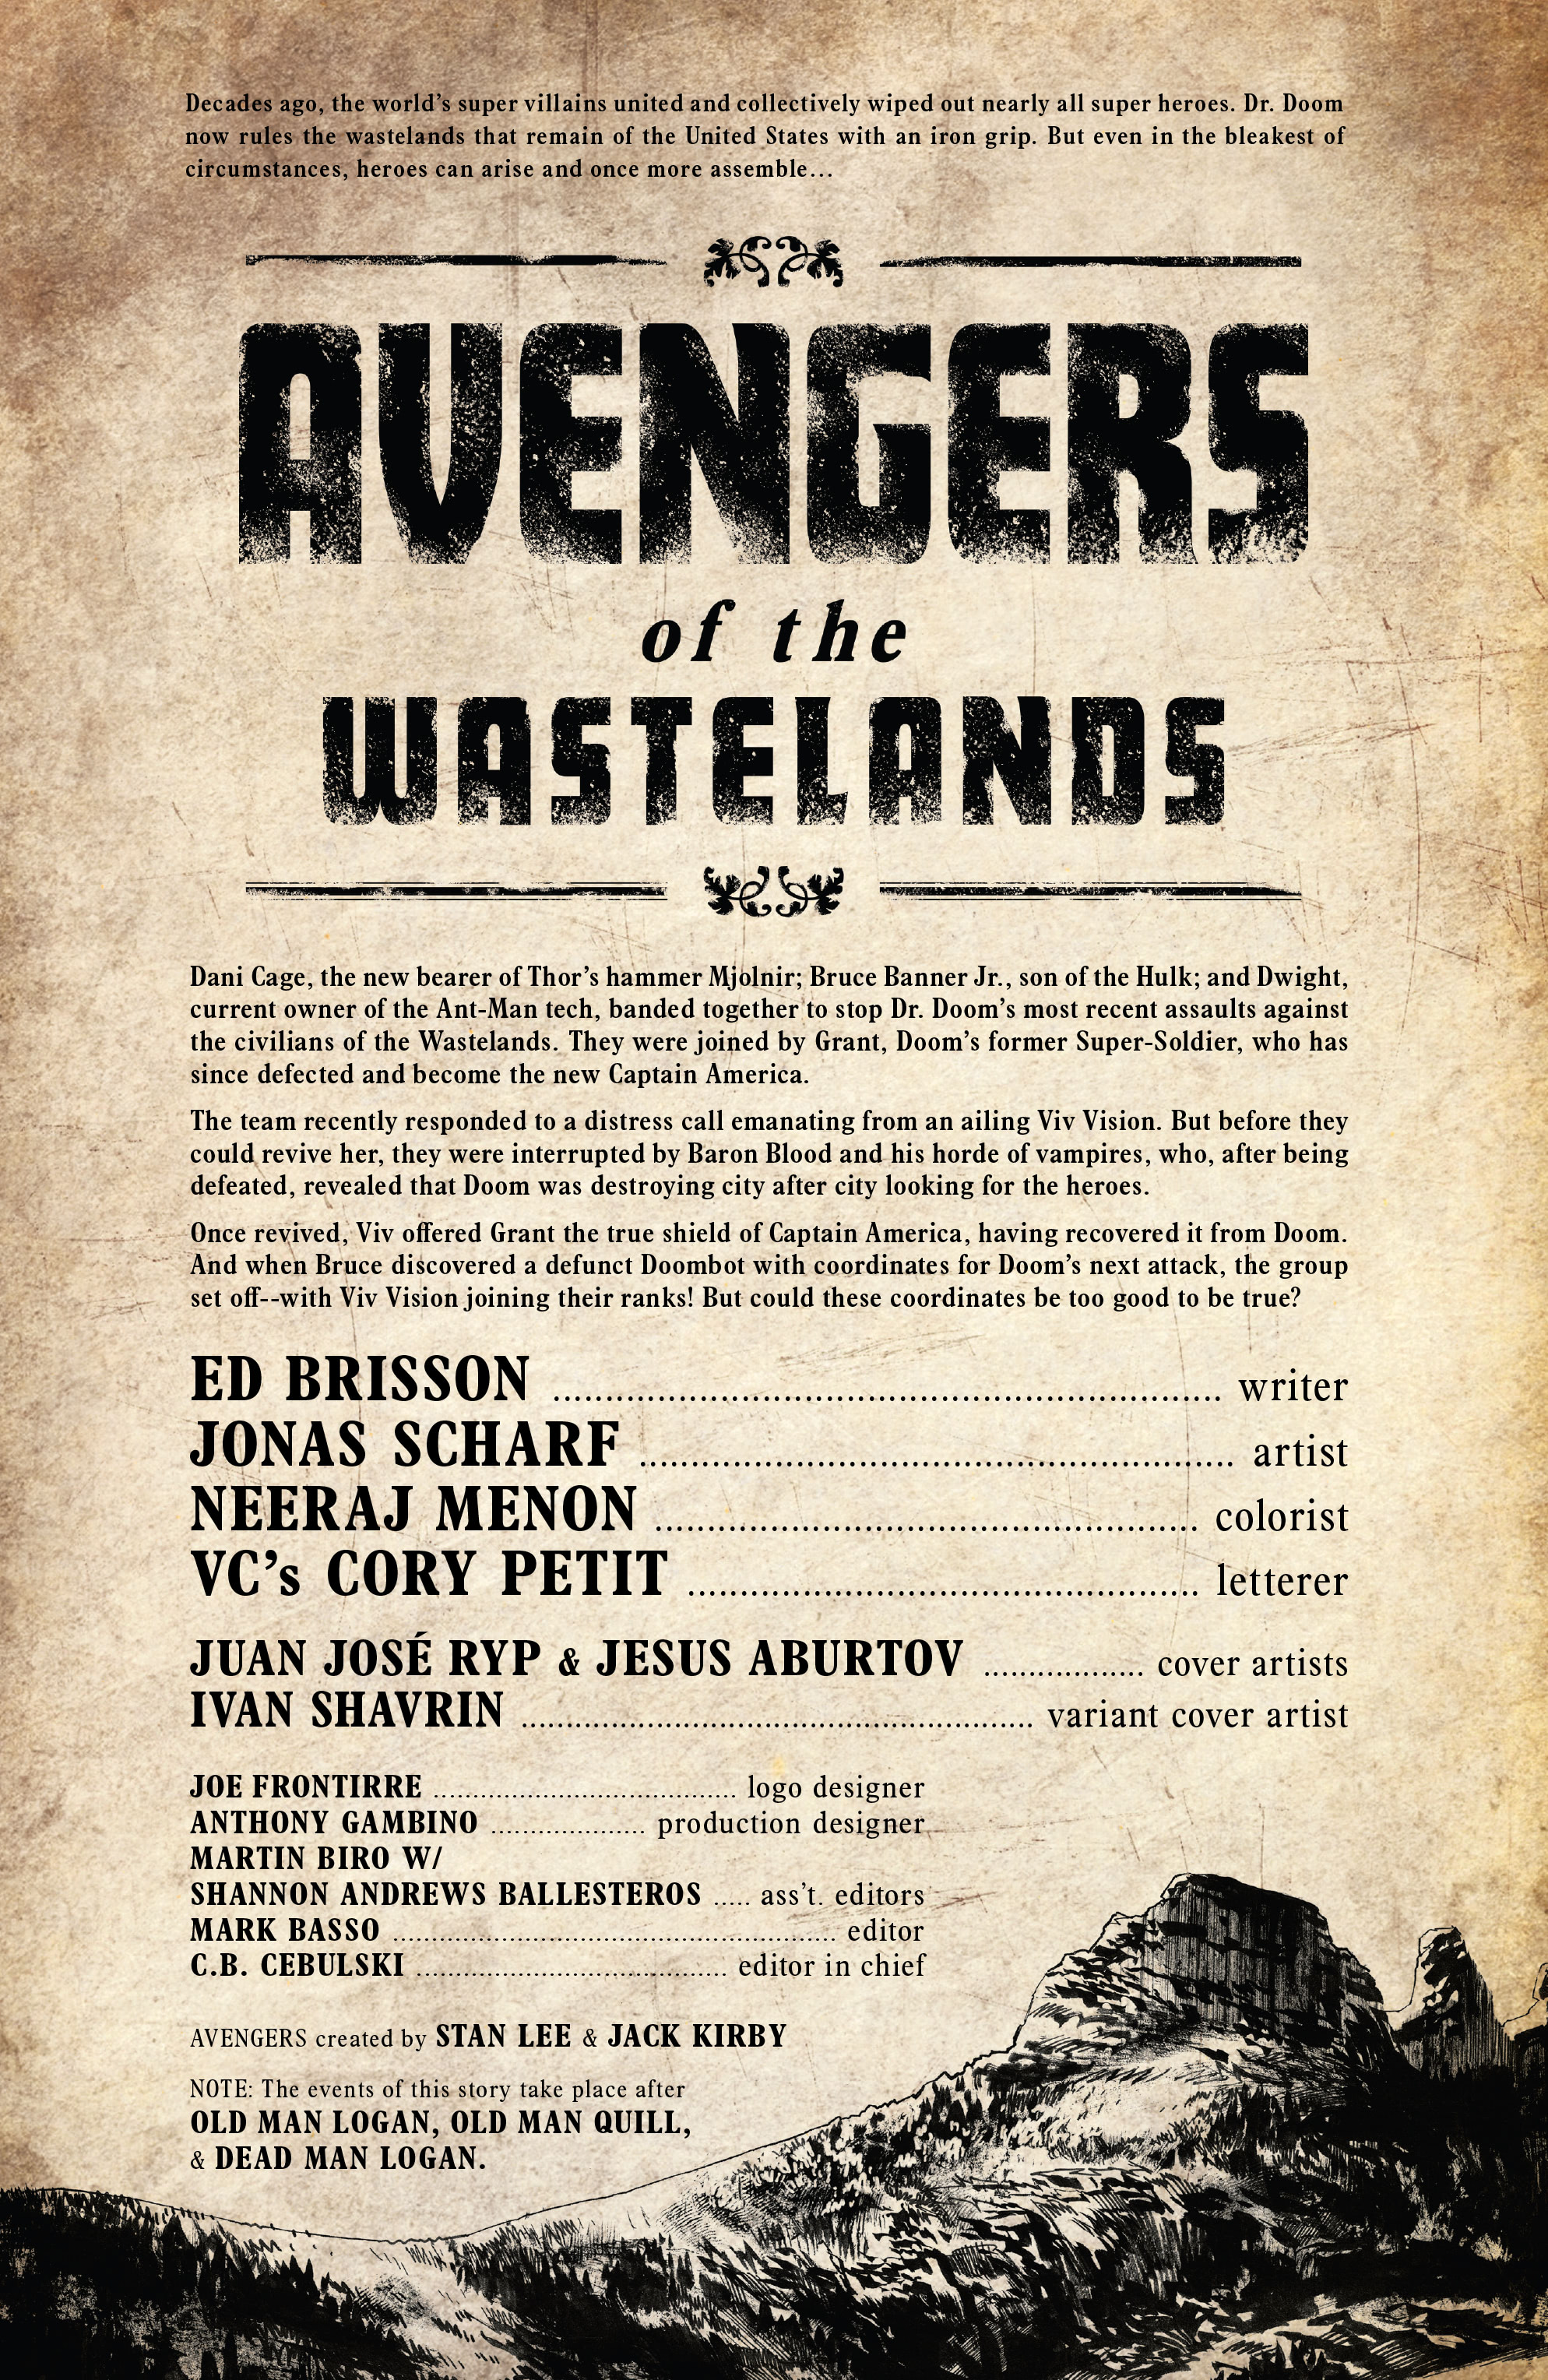 Read online Avengers Of The Wastelands comic -  Issue #4 - 7